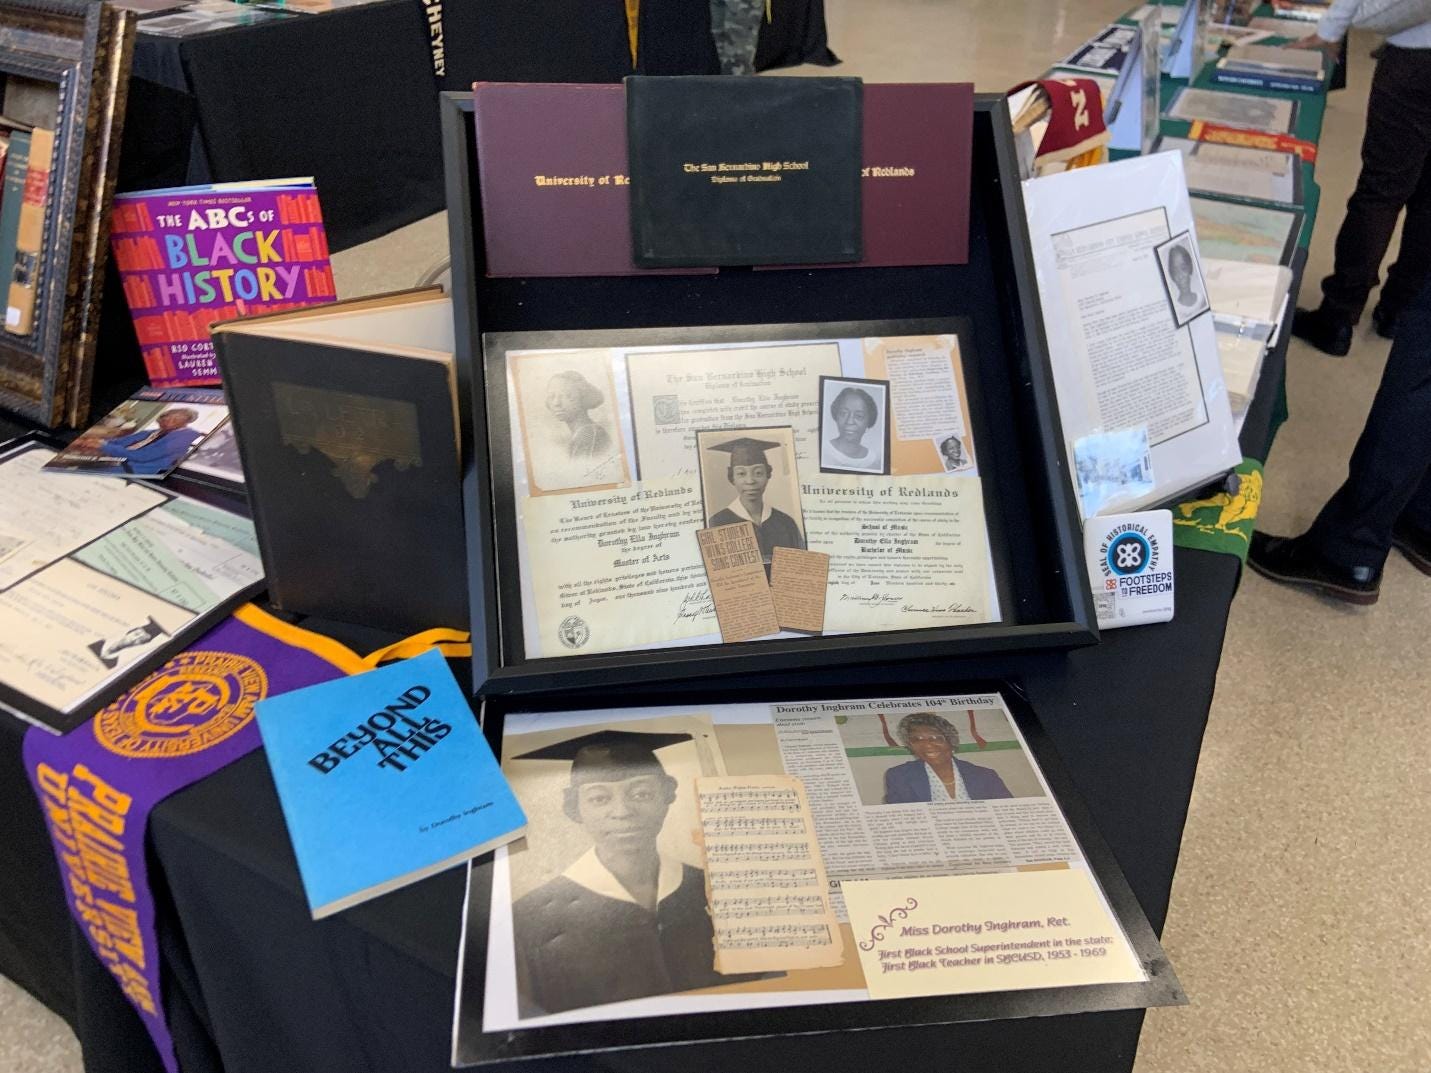 A display of graduation photos and books

Description automatically generated